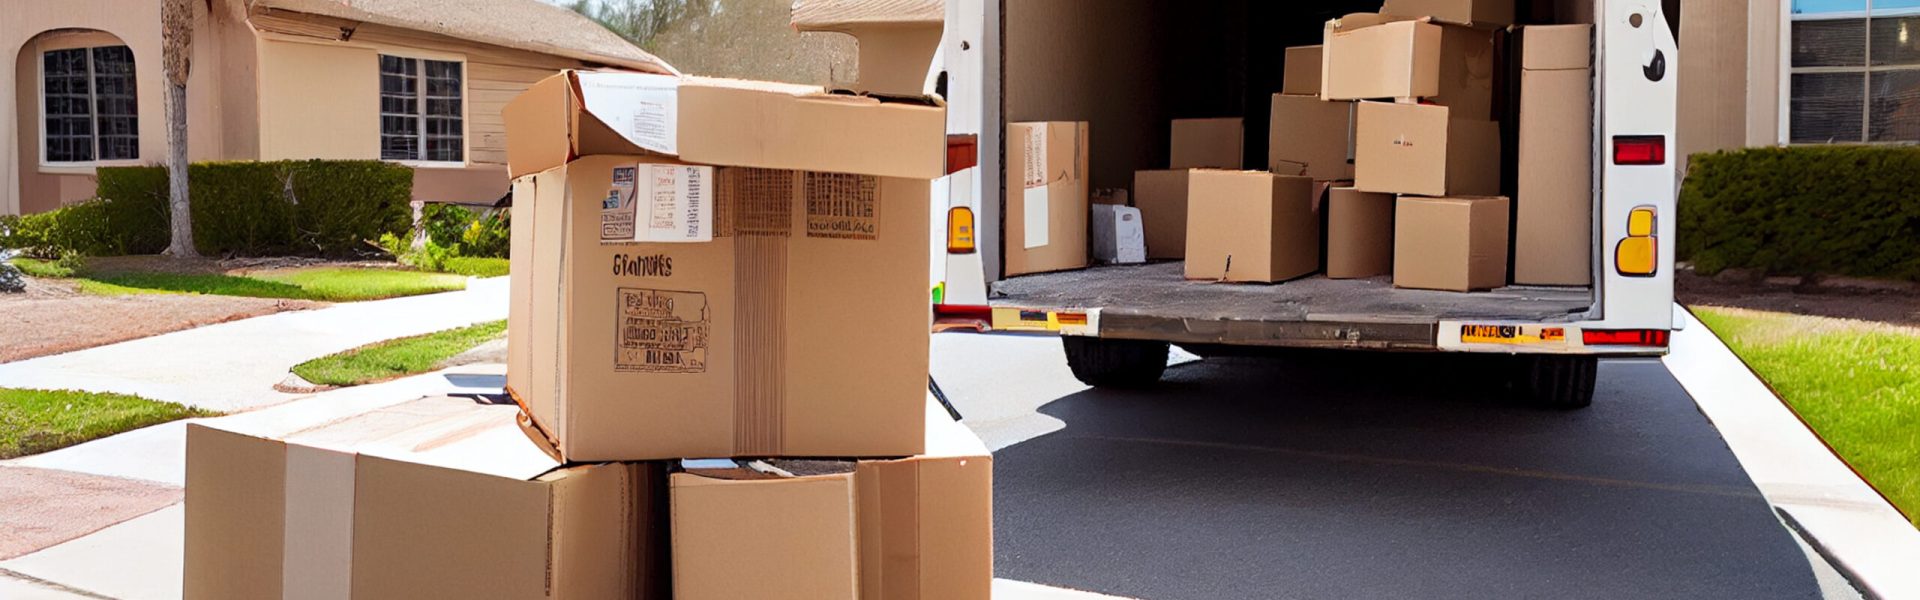 Moving services in Saint Paul MN